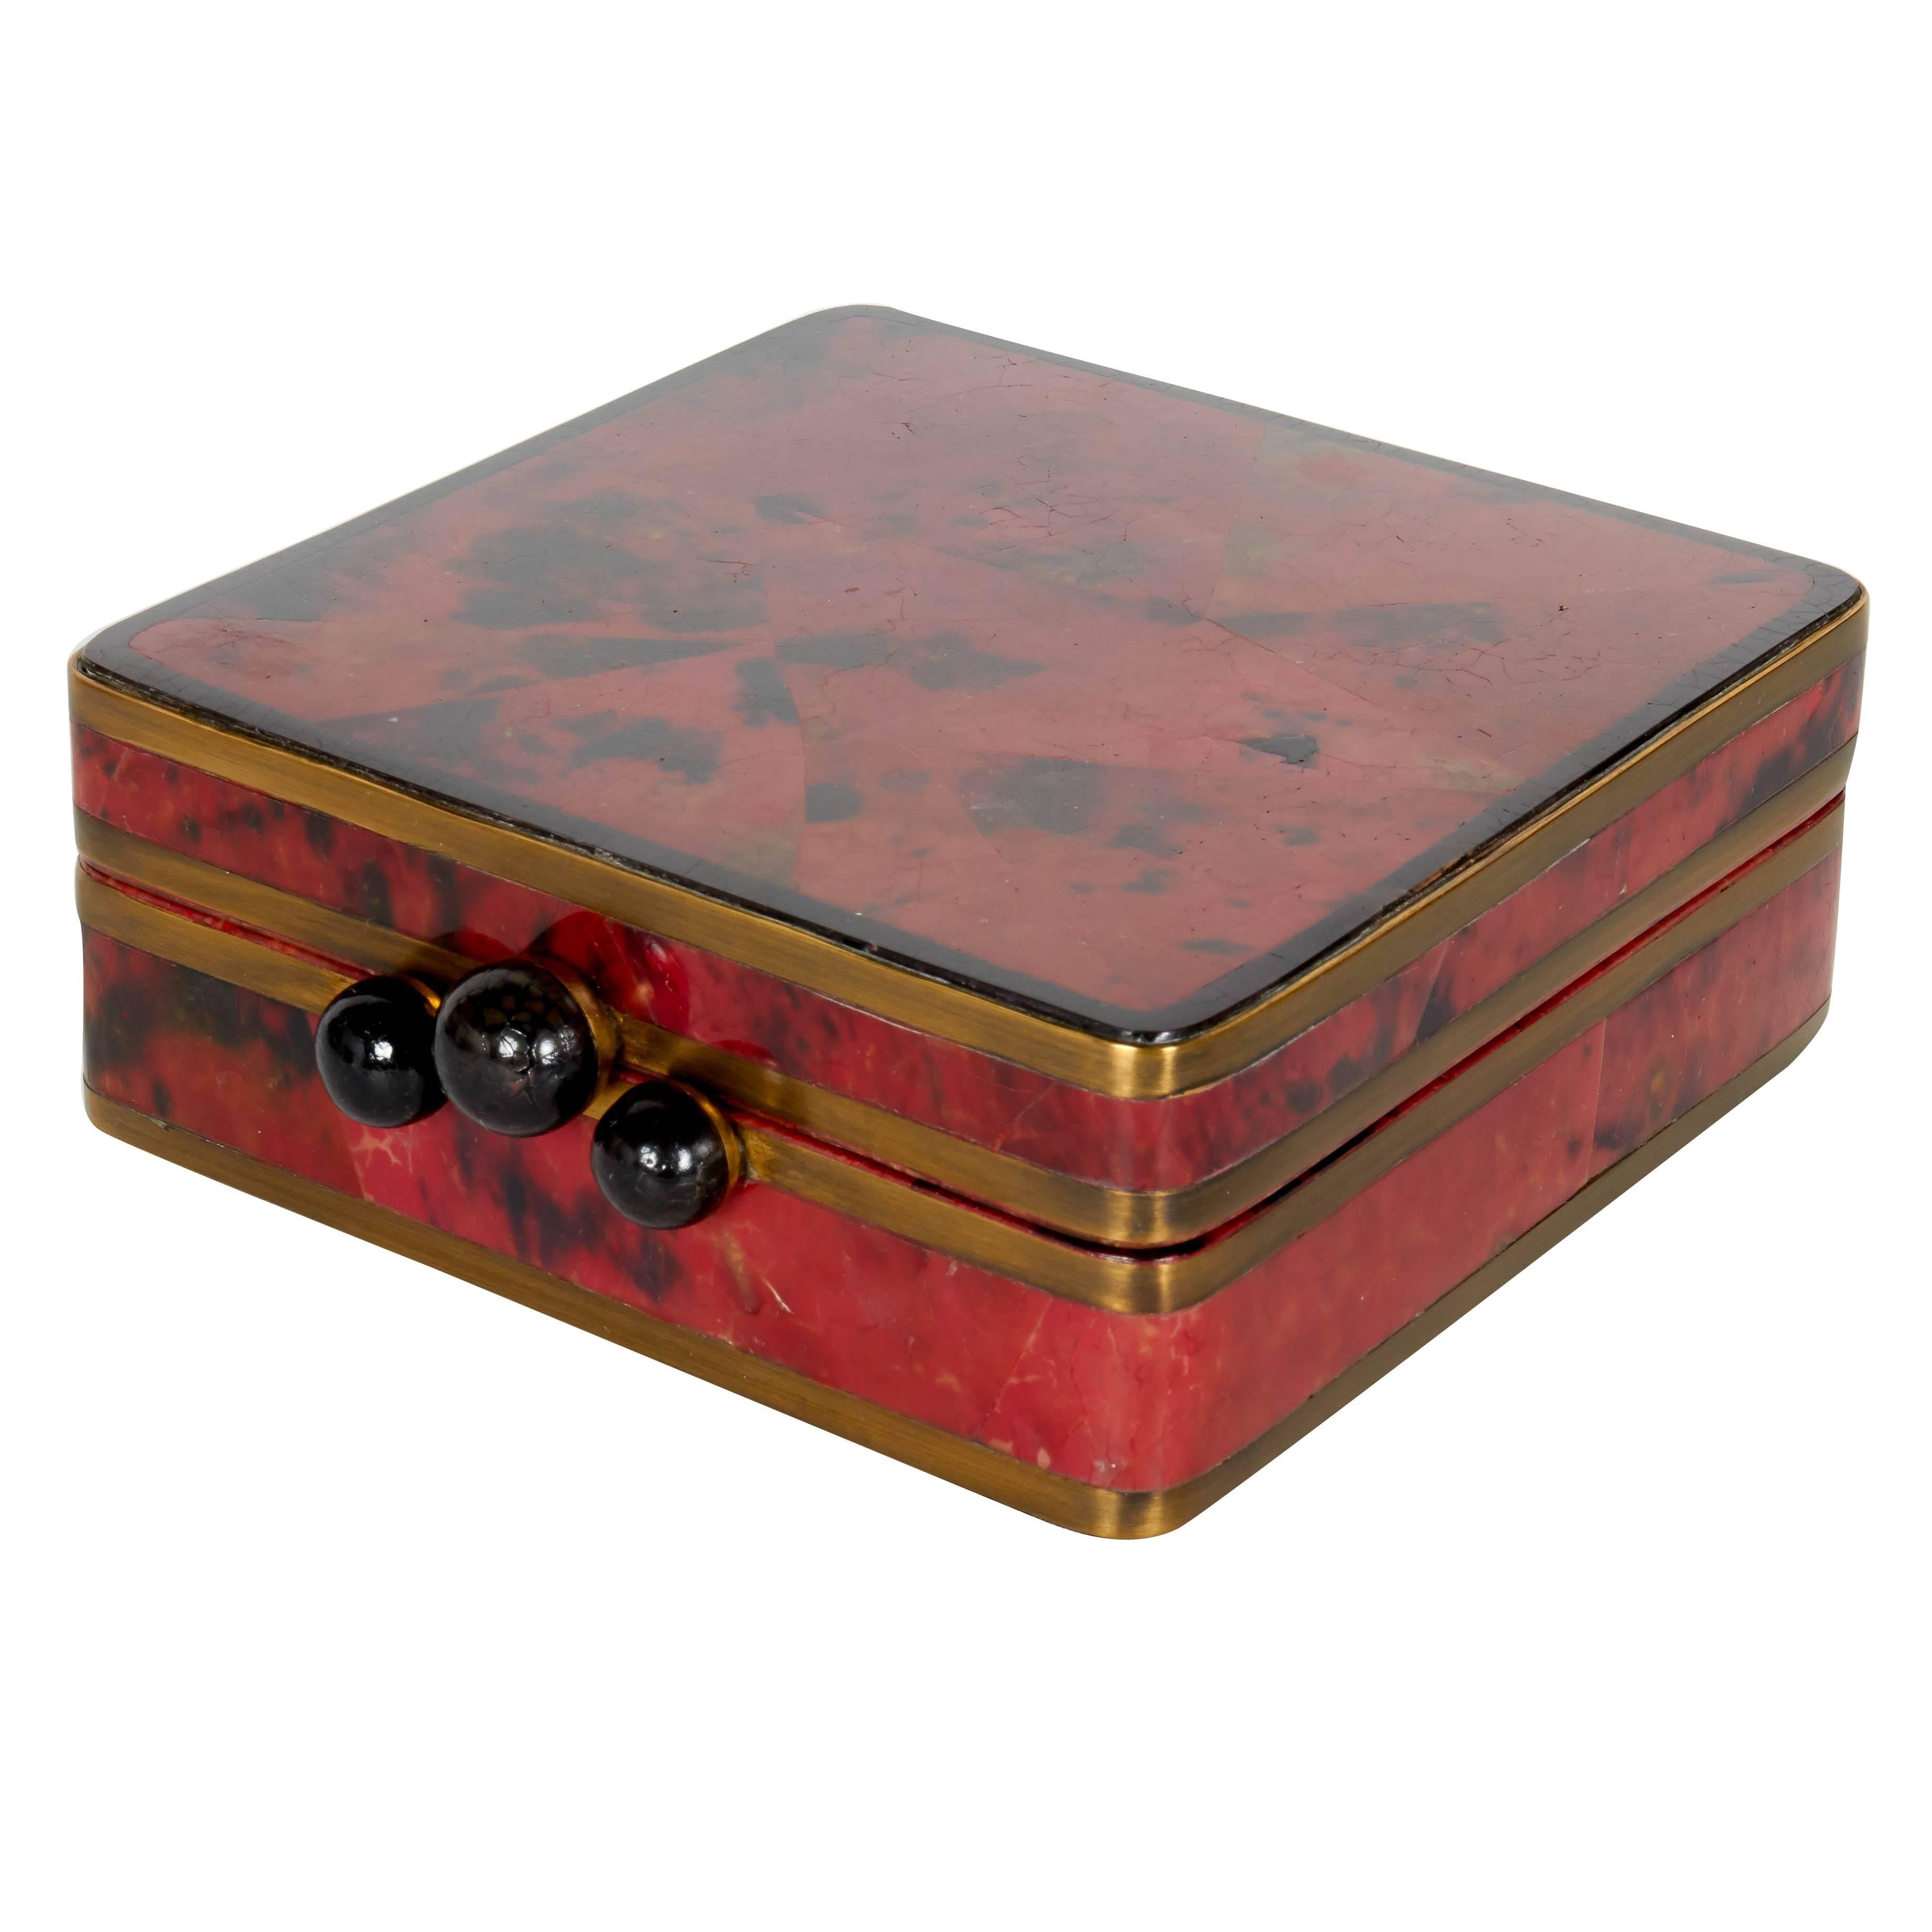 Elegant Pen Shell Decorative Box with Bronze and Onyx Details